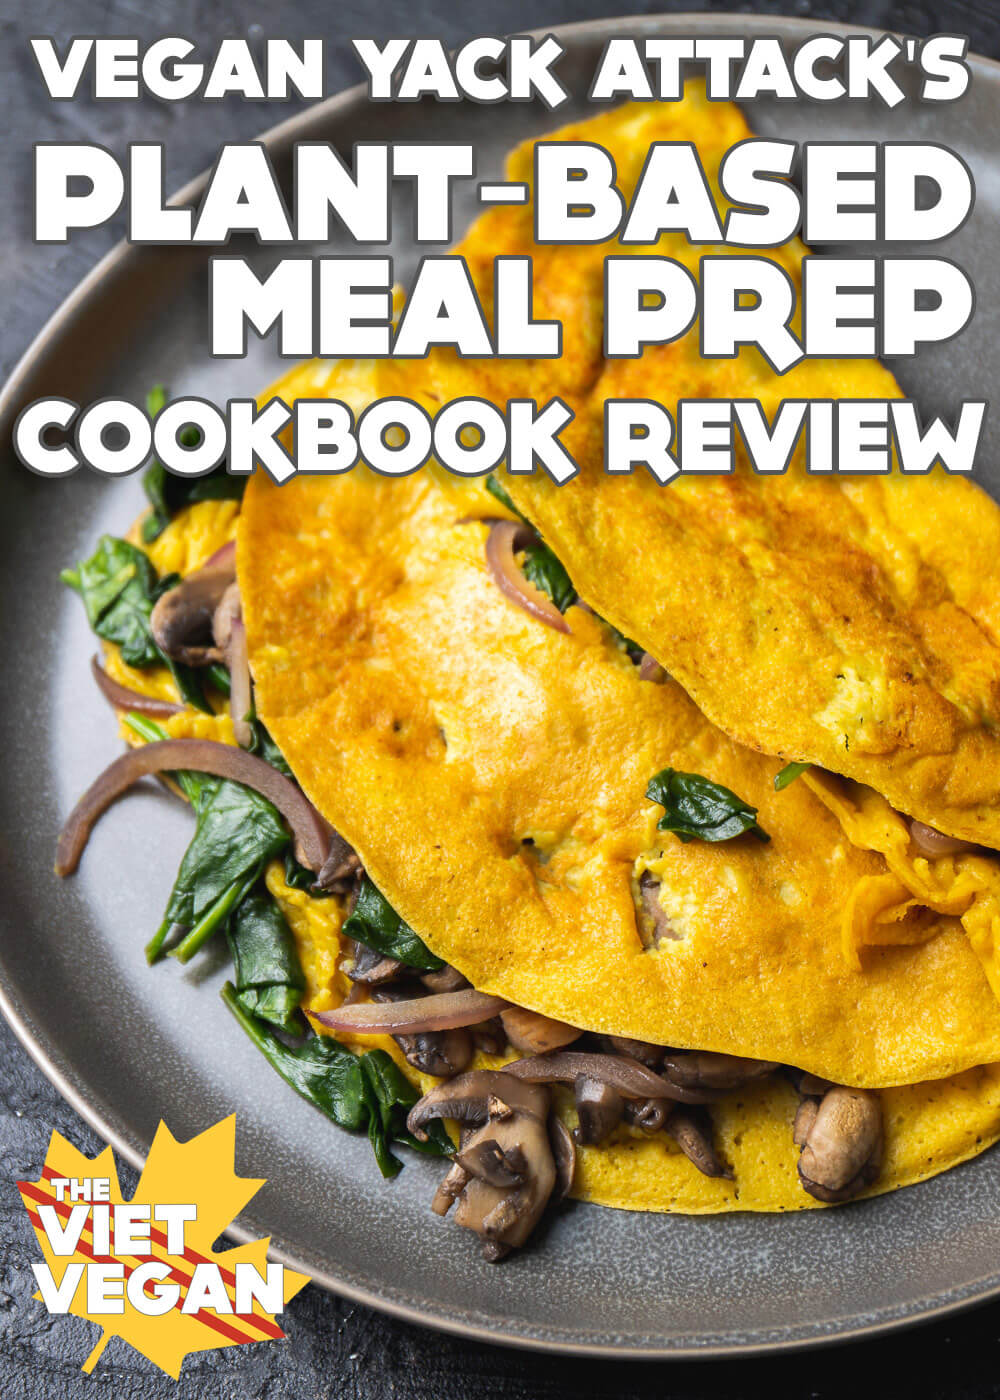 Vegan omelette with Plant-Based Meal Prep cookbook review text overlay